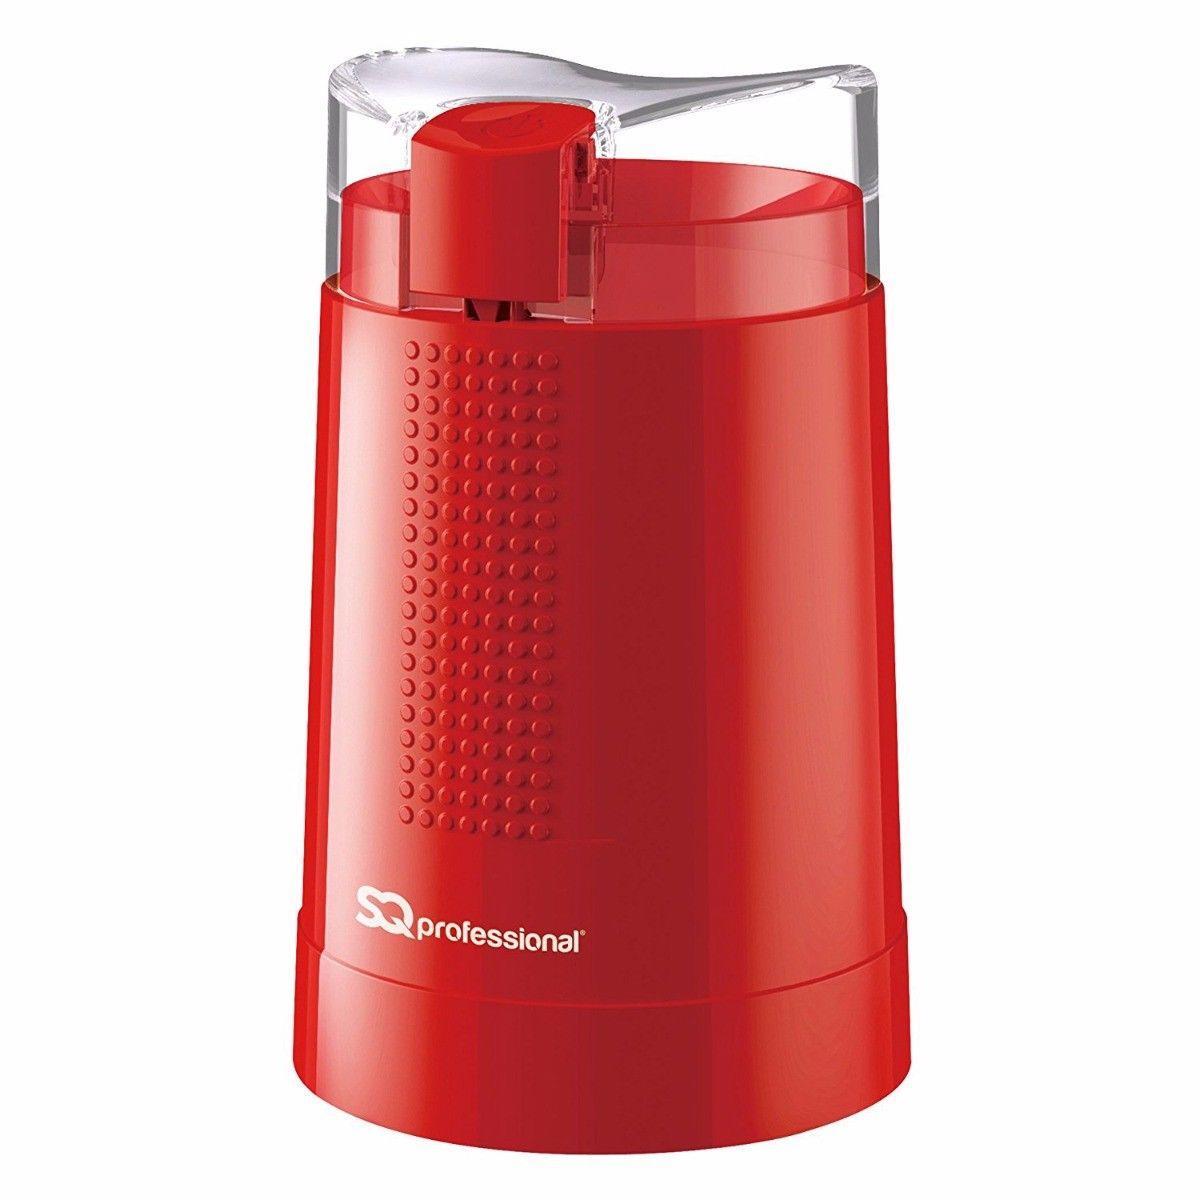 SQ Professional Blitz Coffee Grinder 150W Red 2341 (Parcel Rate)